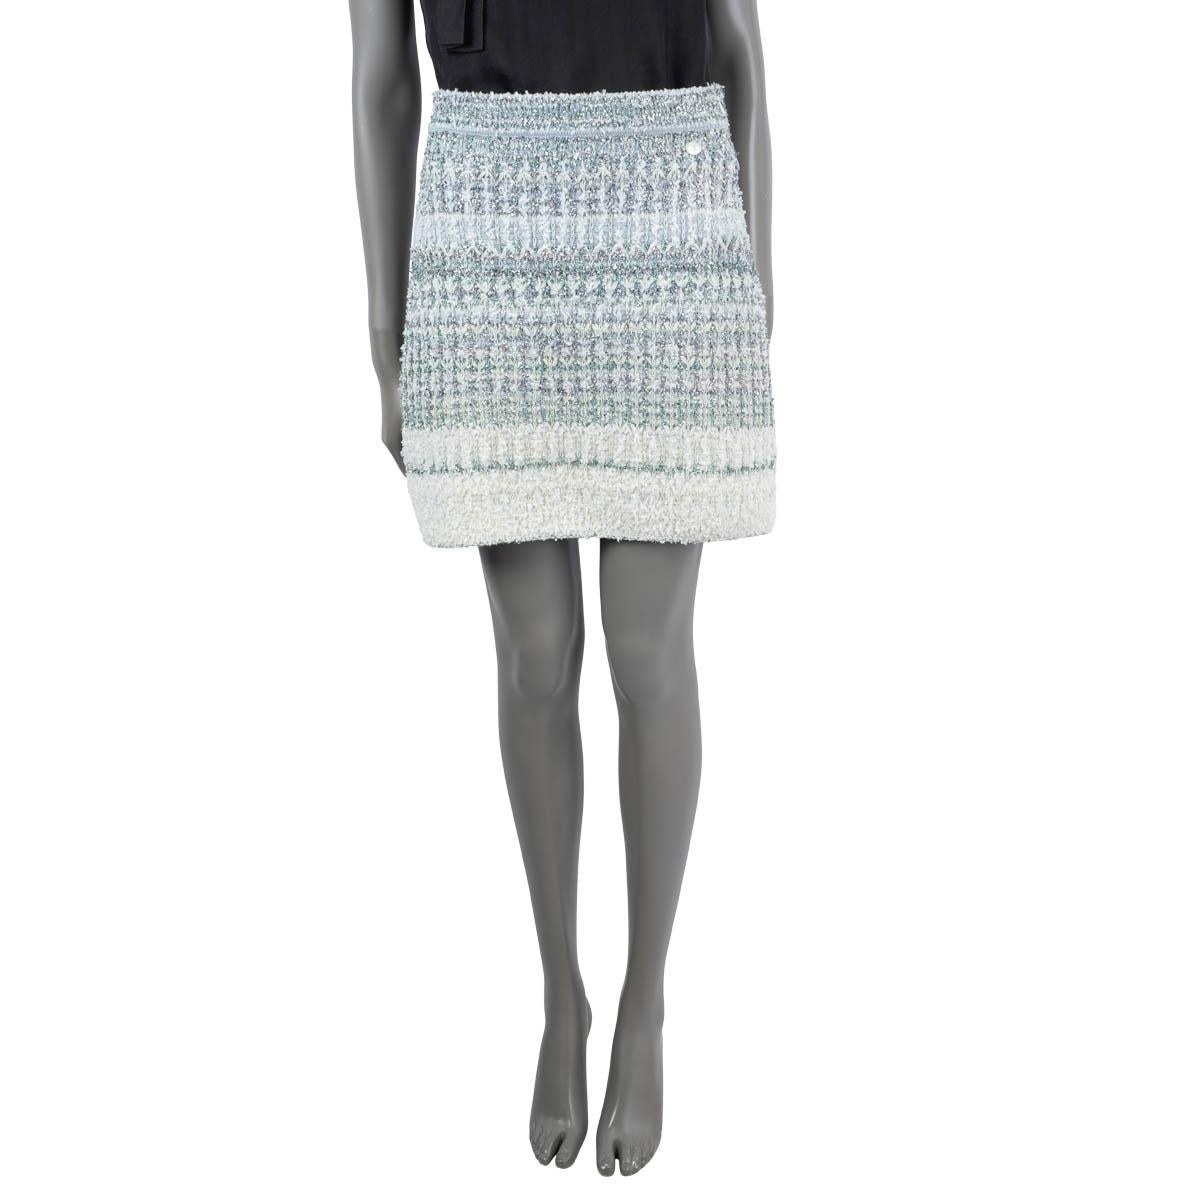 100% authentic Chanel waterfall lurex knit mini skirt in ivory and blue cashmere (39%), polyamide (27%), cotton (23%), polyester (6%) and silk (5%). Features a CC button at the waist. Unlined. Has been worn and is in excellent condition.

2018